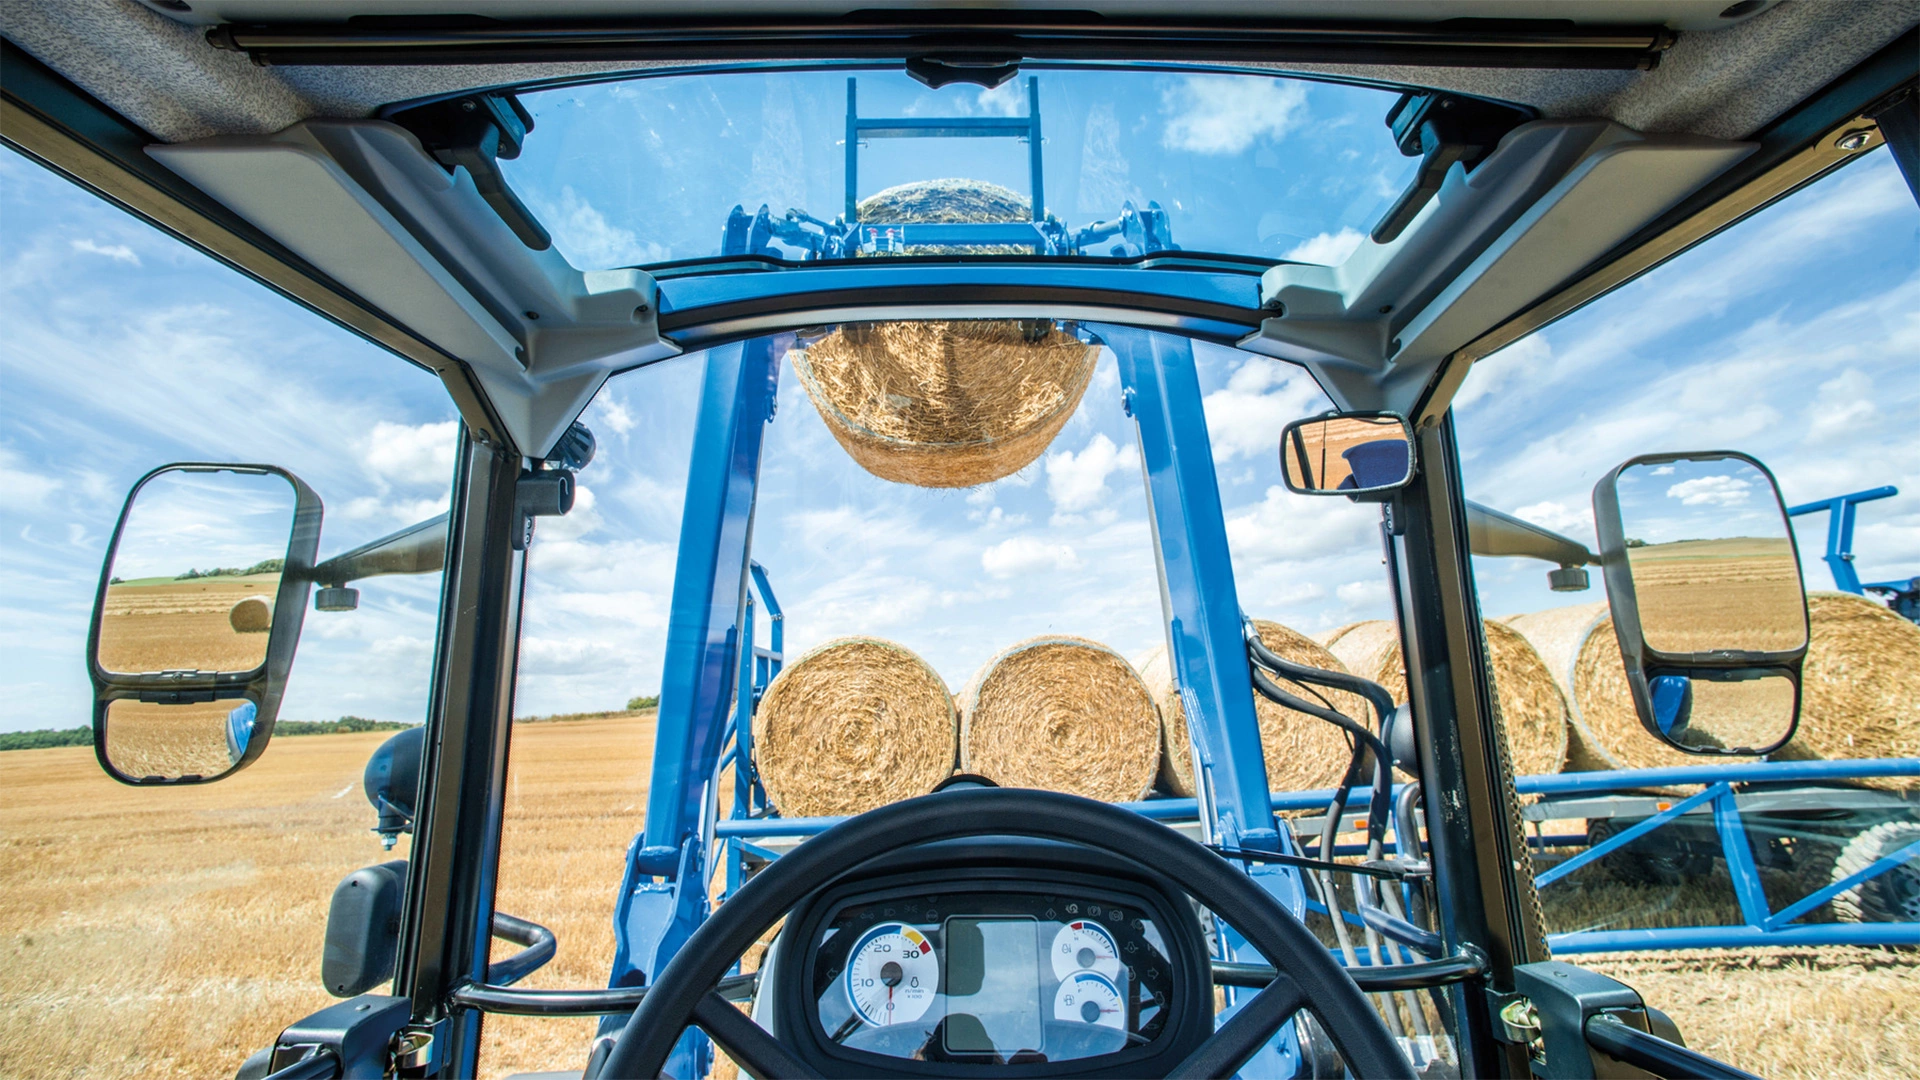 Driver's perspective from within the New Holland T5 Electro Command farming tractor cabin